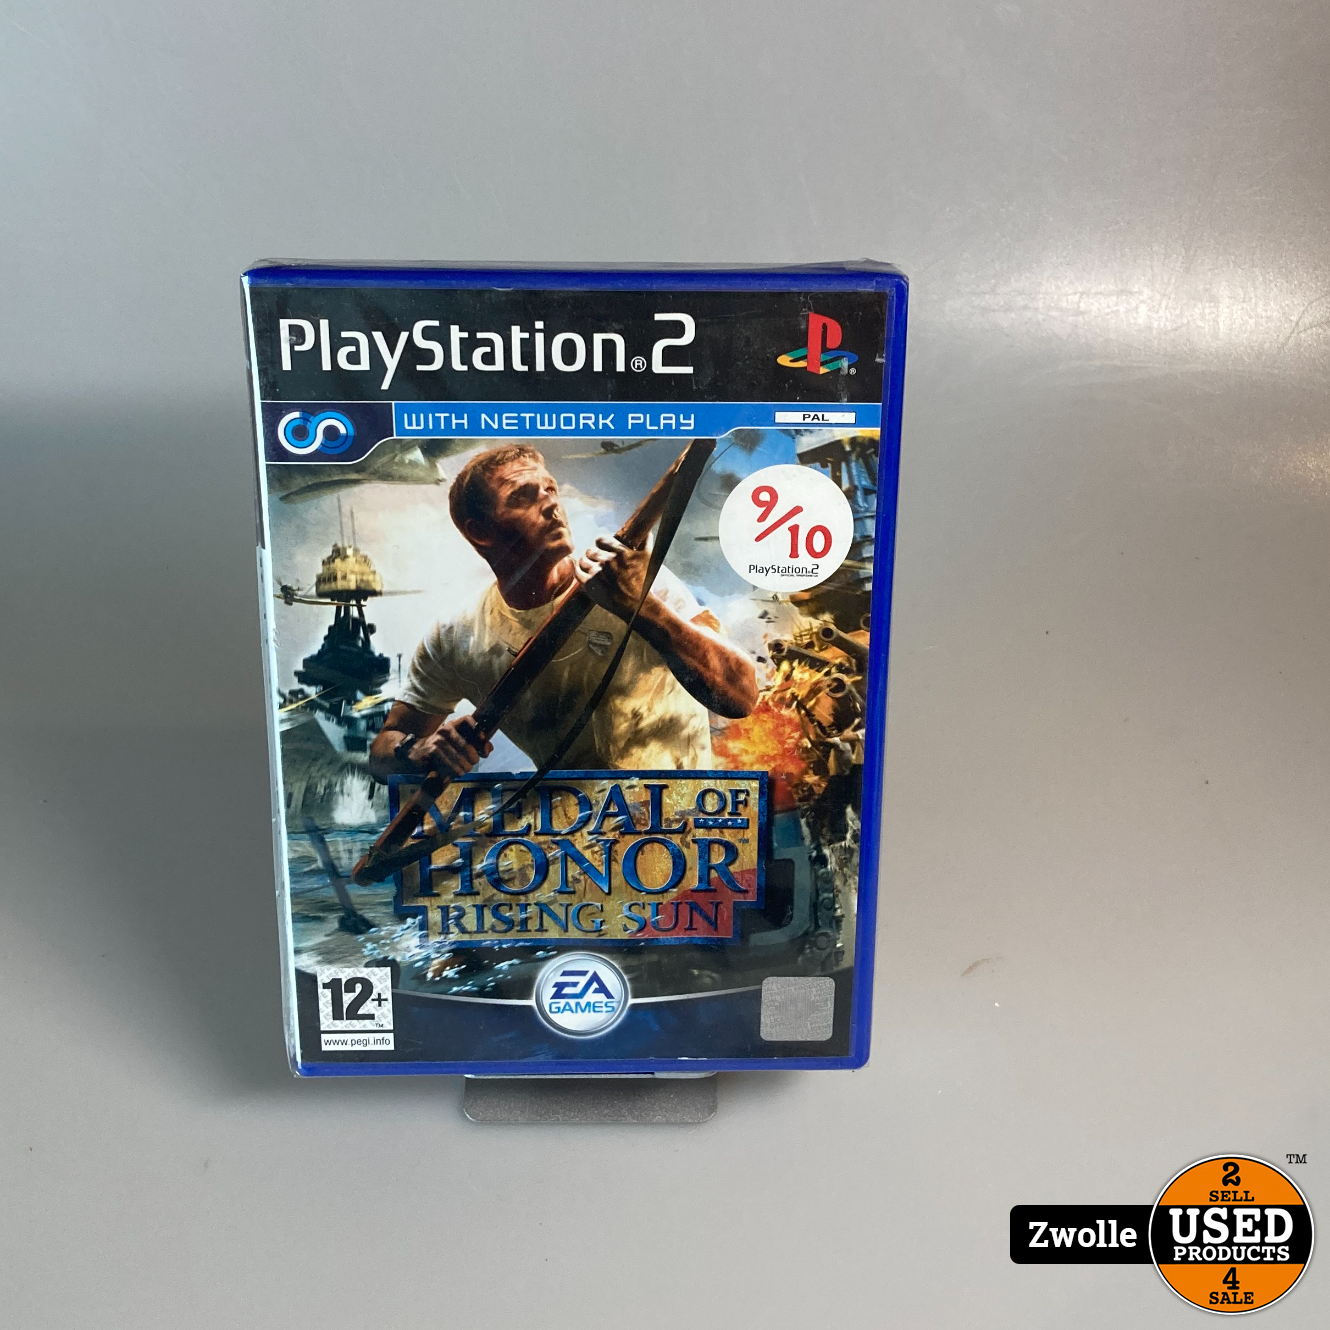 Transparant Presentator langzaam playstation ps2 game medal of honor : rising sun - Used Products Zwolle